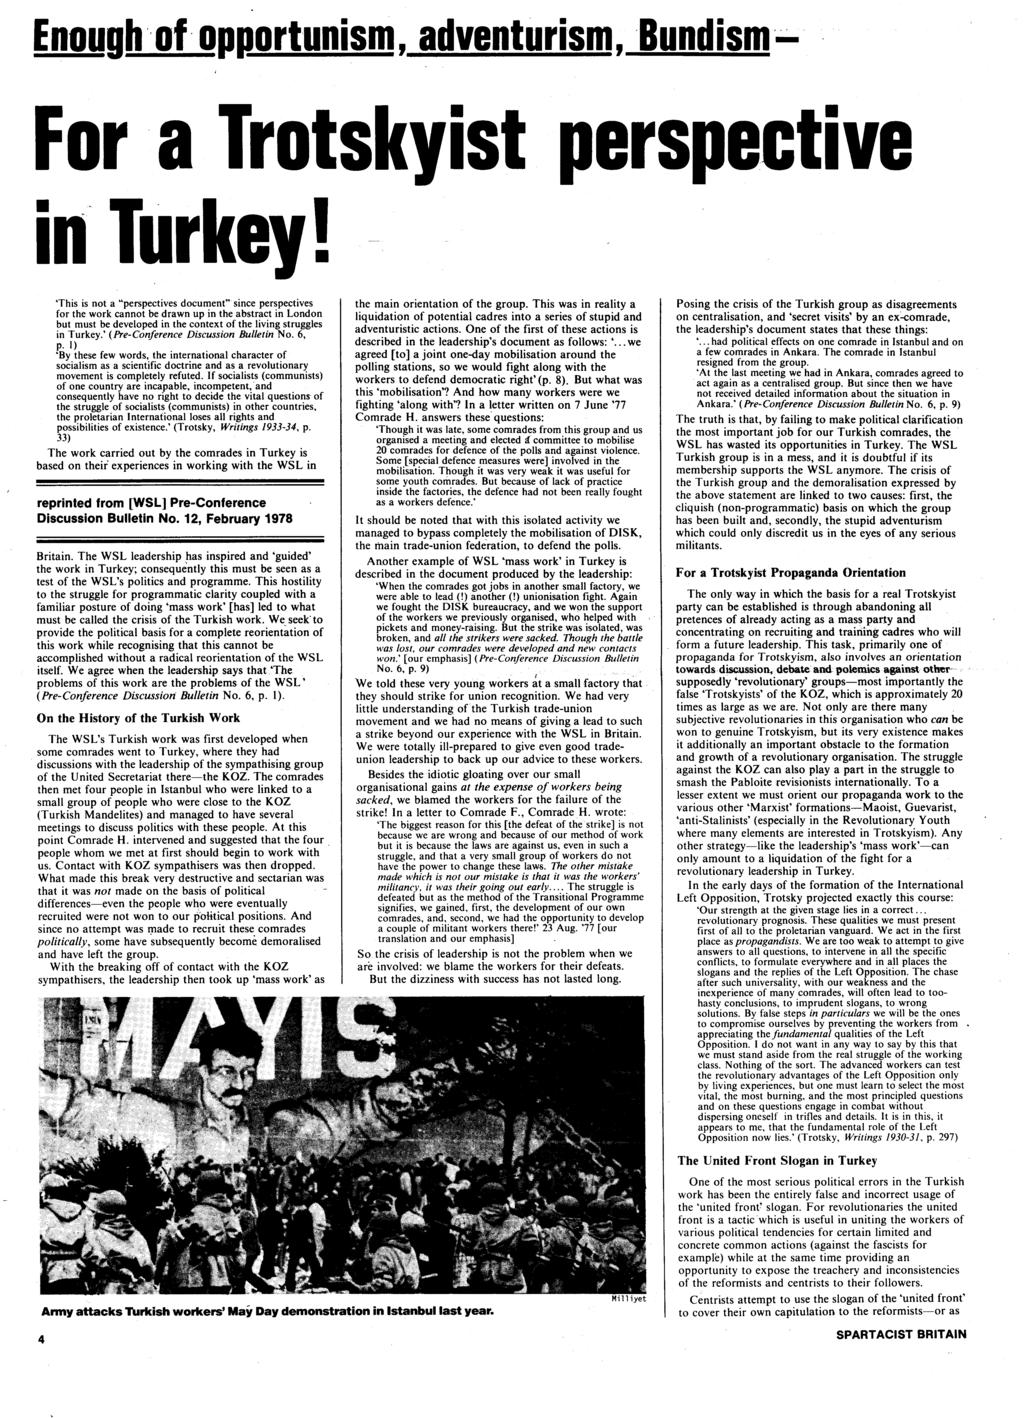 Enough of opportunism, adventurism,bundism~ For a Trotskyist perspective in Turkey!